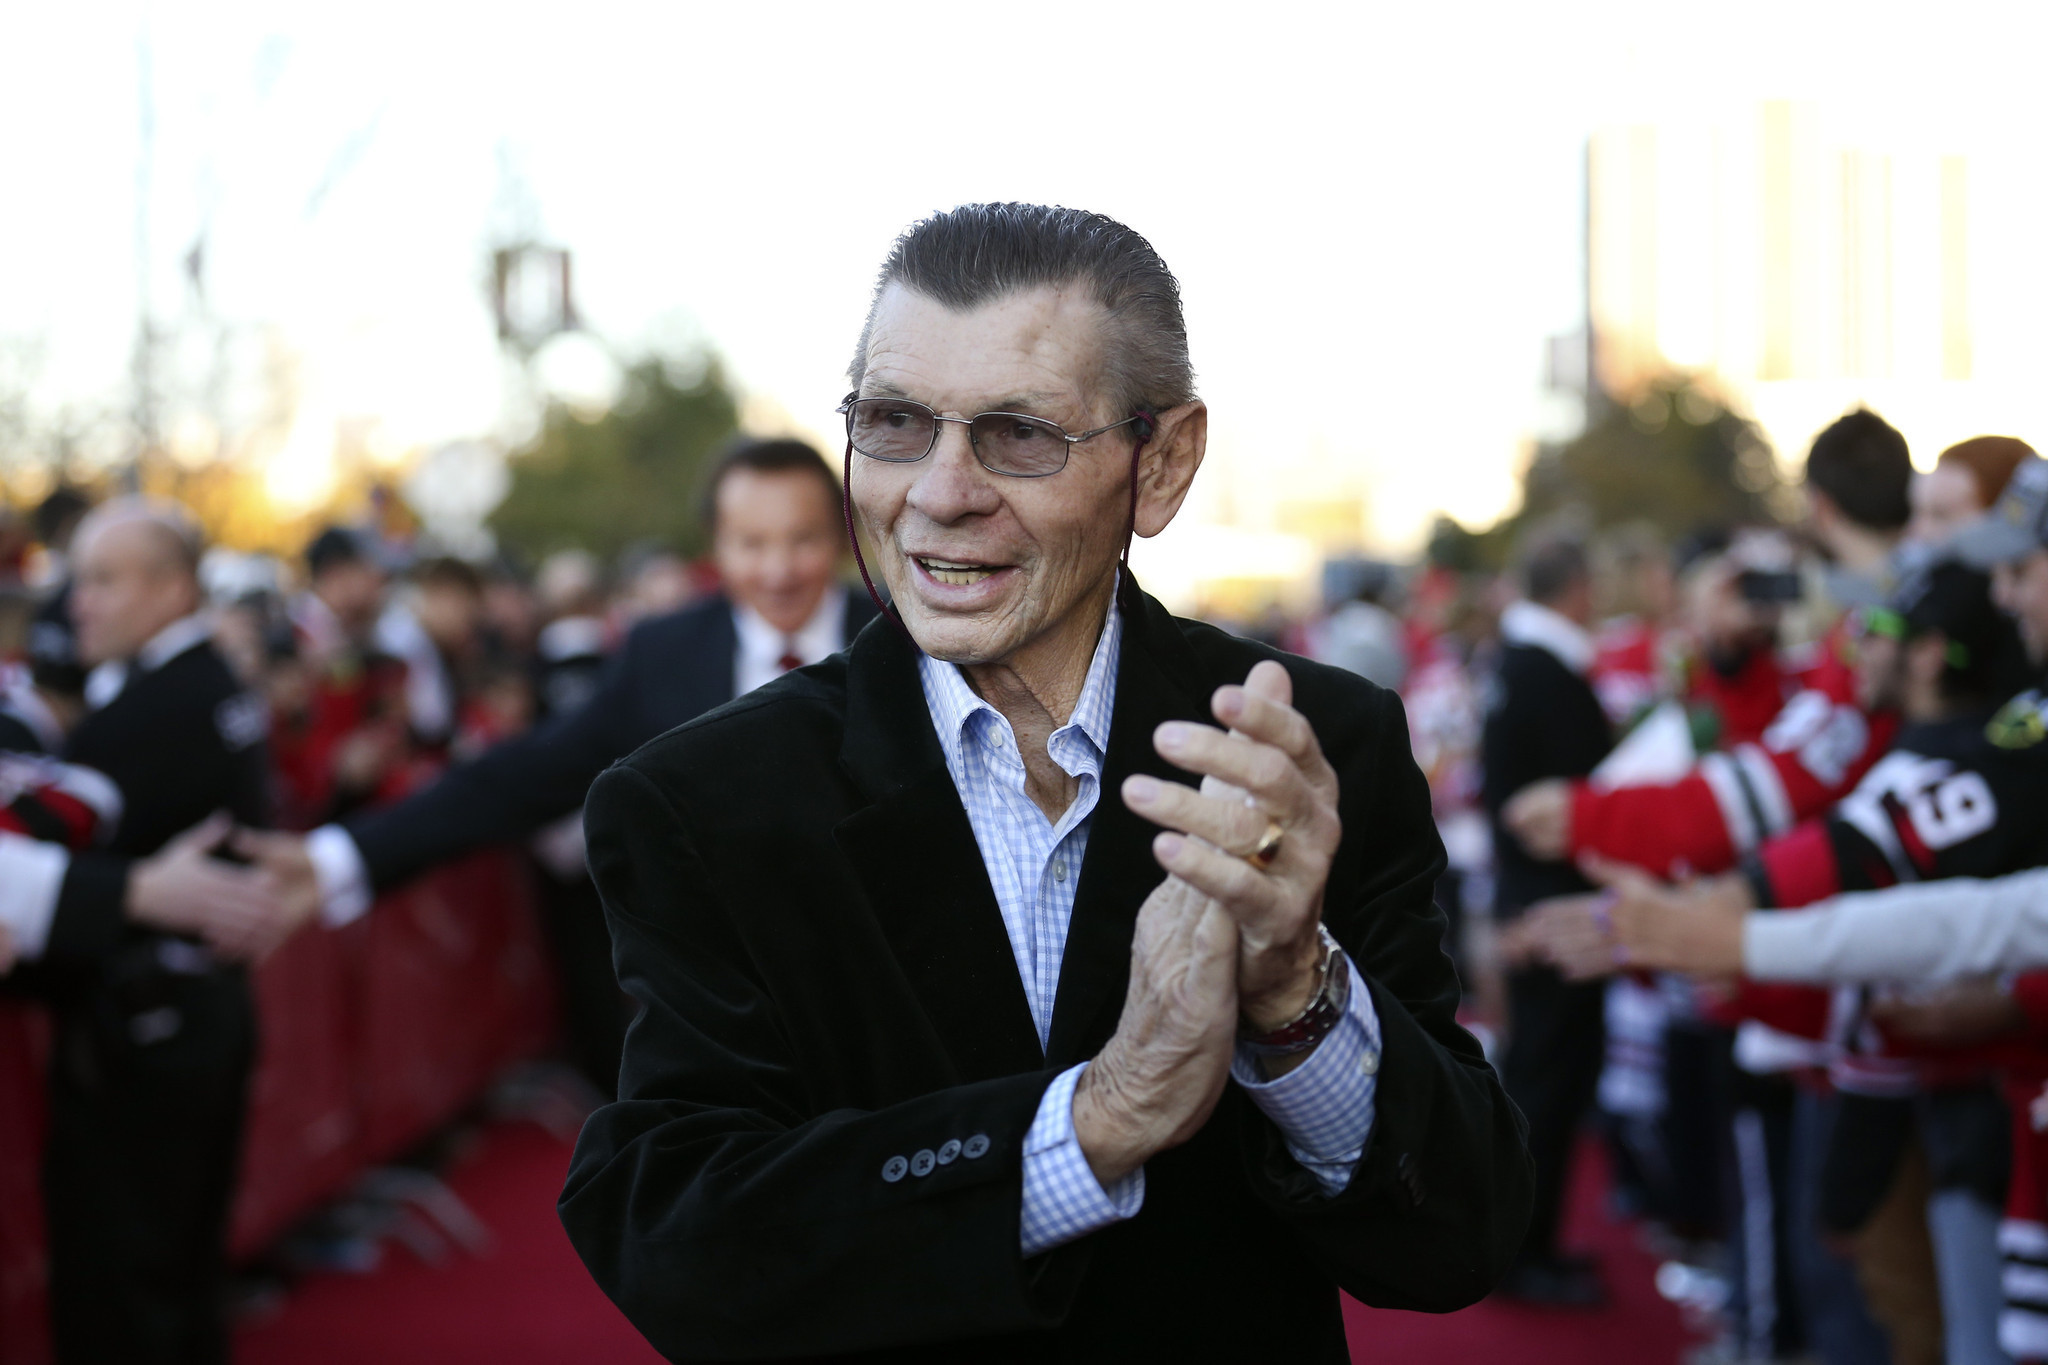 Stan Mikita won't attend NHL's Top 100 ceremony due to health issues - Chicago Tribune2048 x 1365